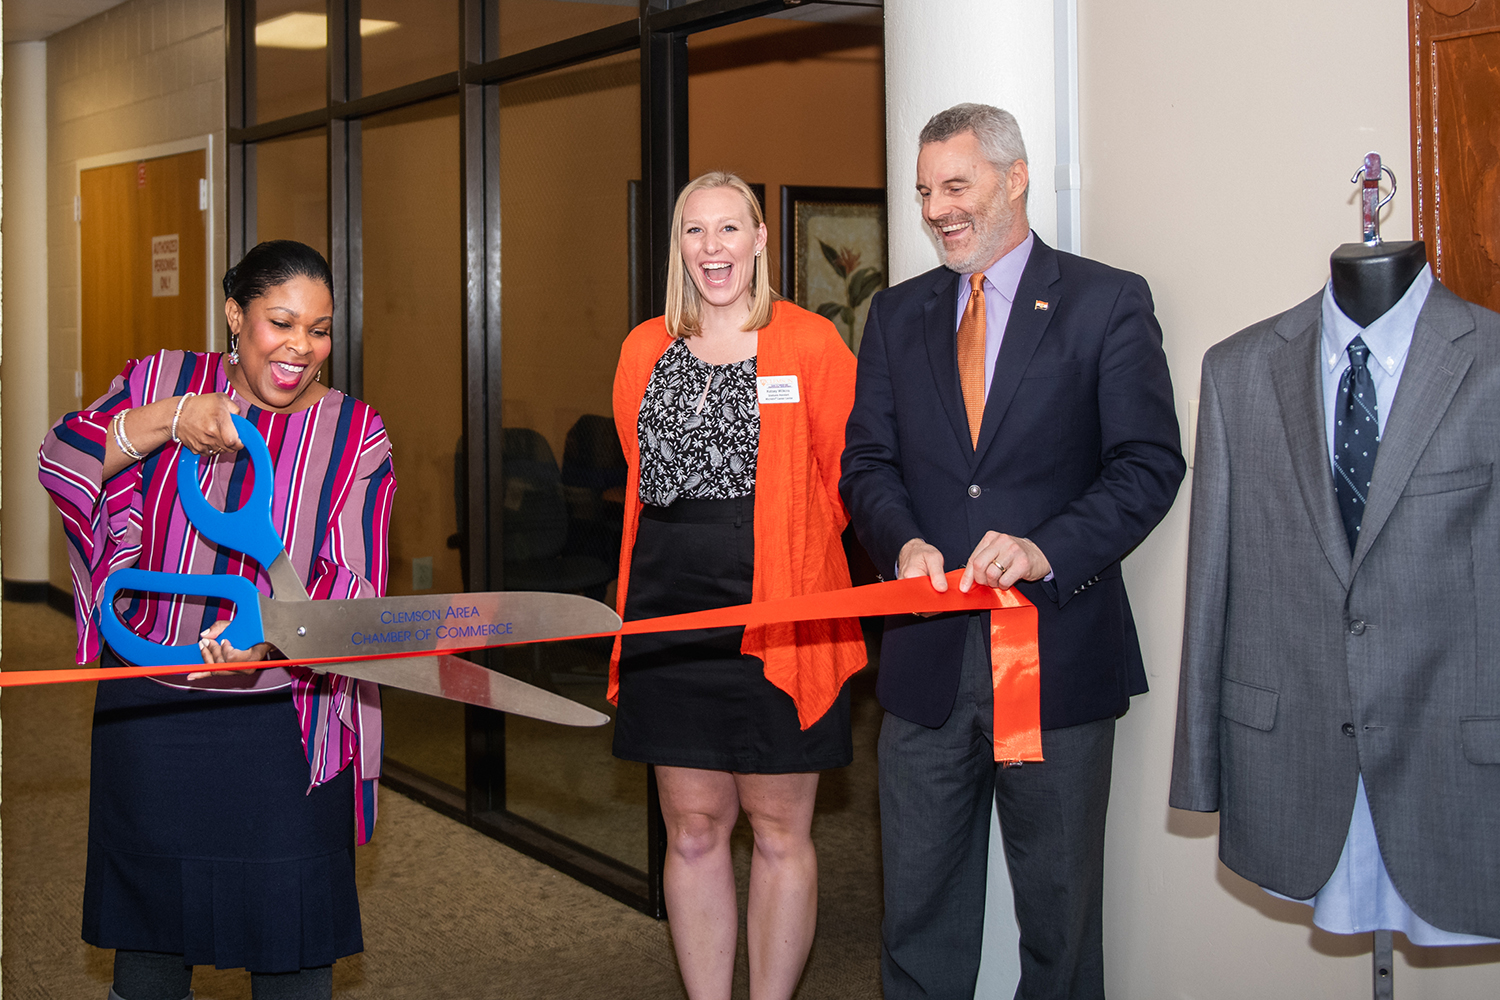 Members of the Career Center cut the ribbon for the grand opening of the CUSG Clothes Closet, which offers business attire to students free of charge.